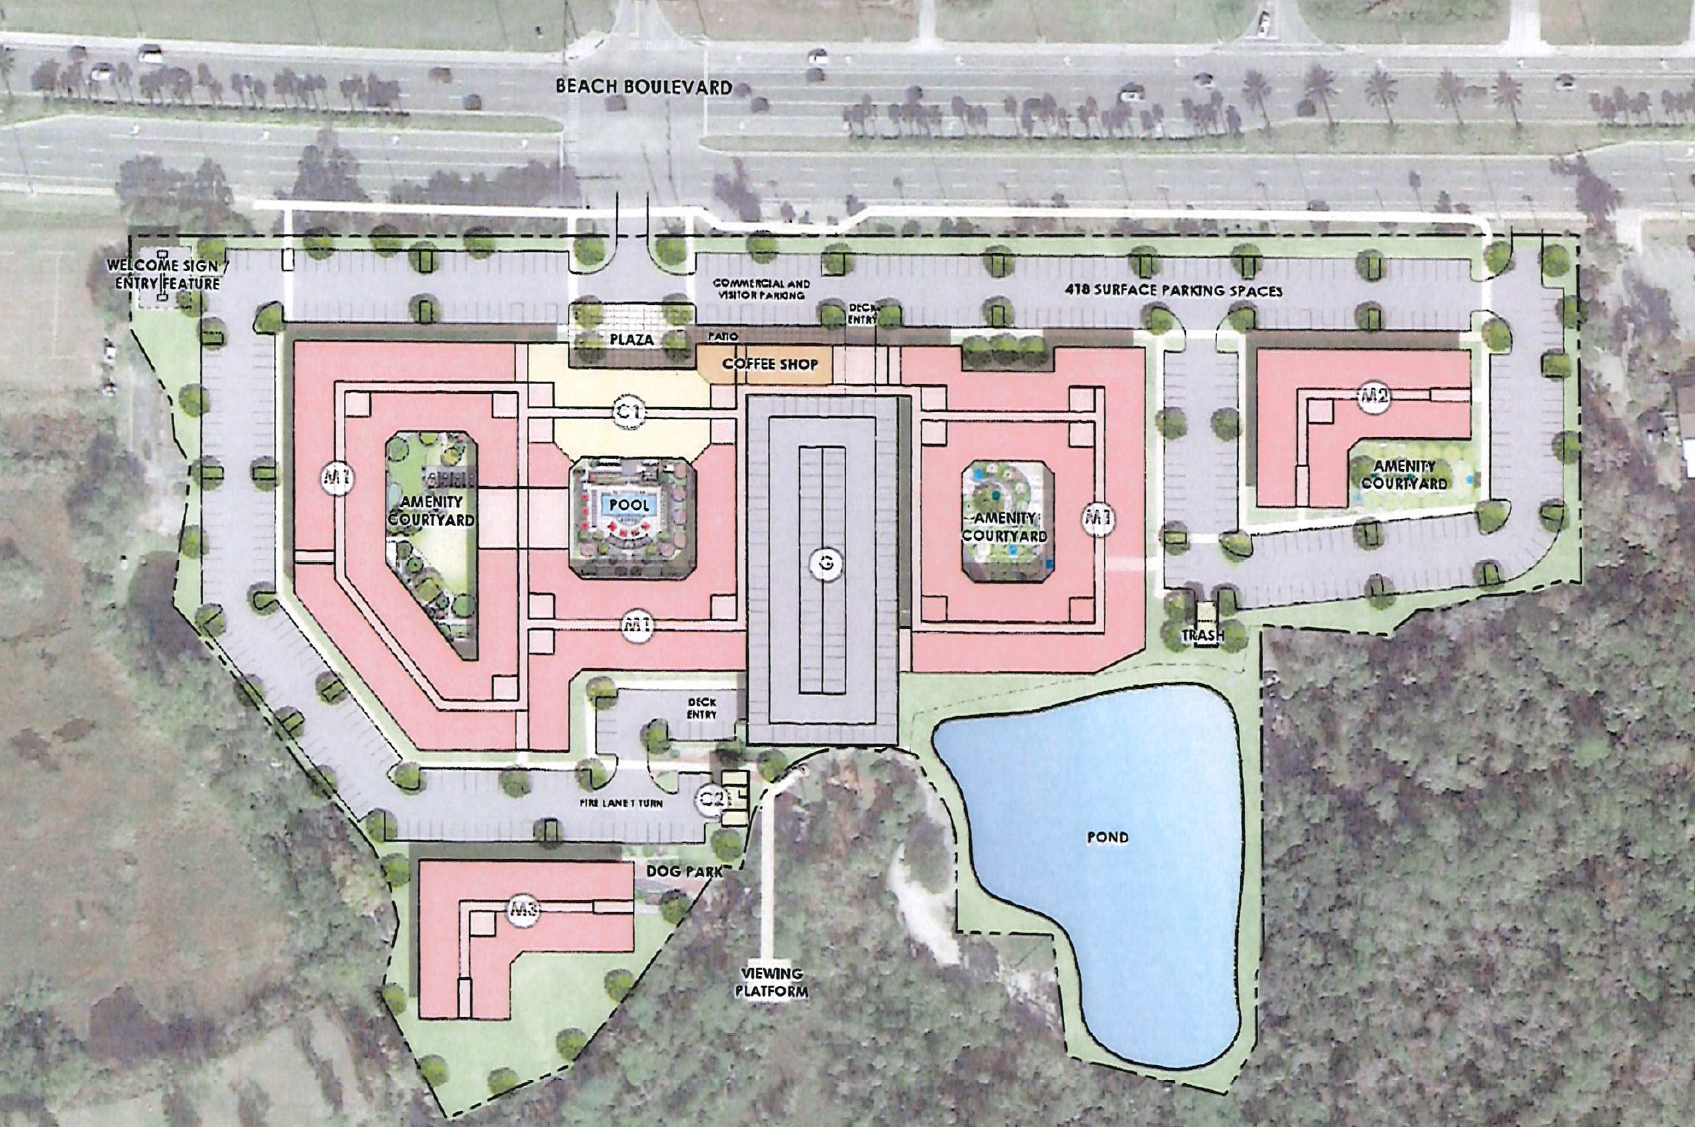 The site plan for the apartment community.